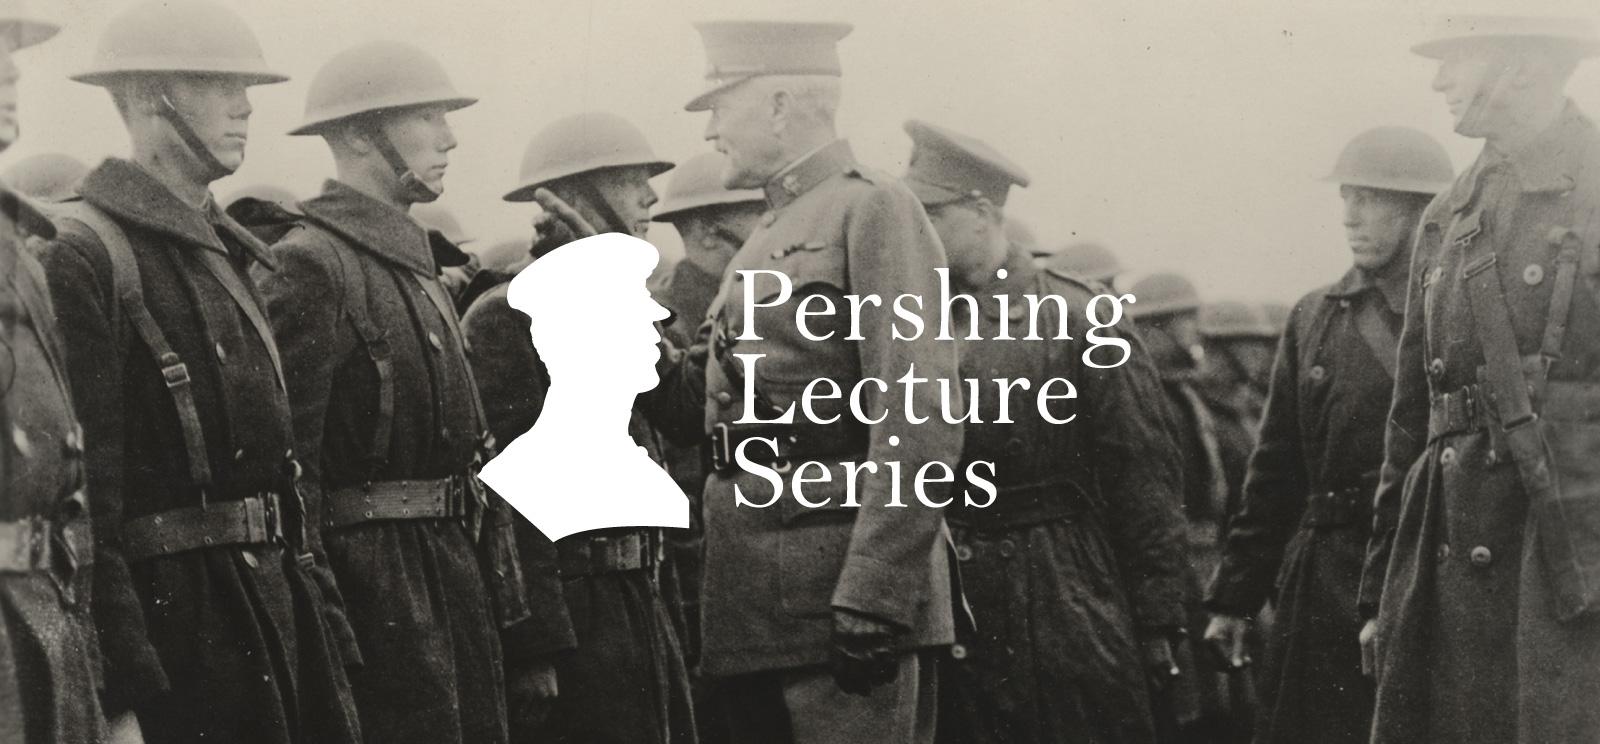 Background image: Black and white photograph of General Pershing inspecting a row of soldiers. Foreground text: Pershing Lecture Series.